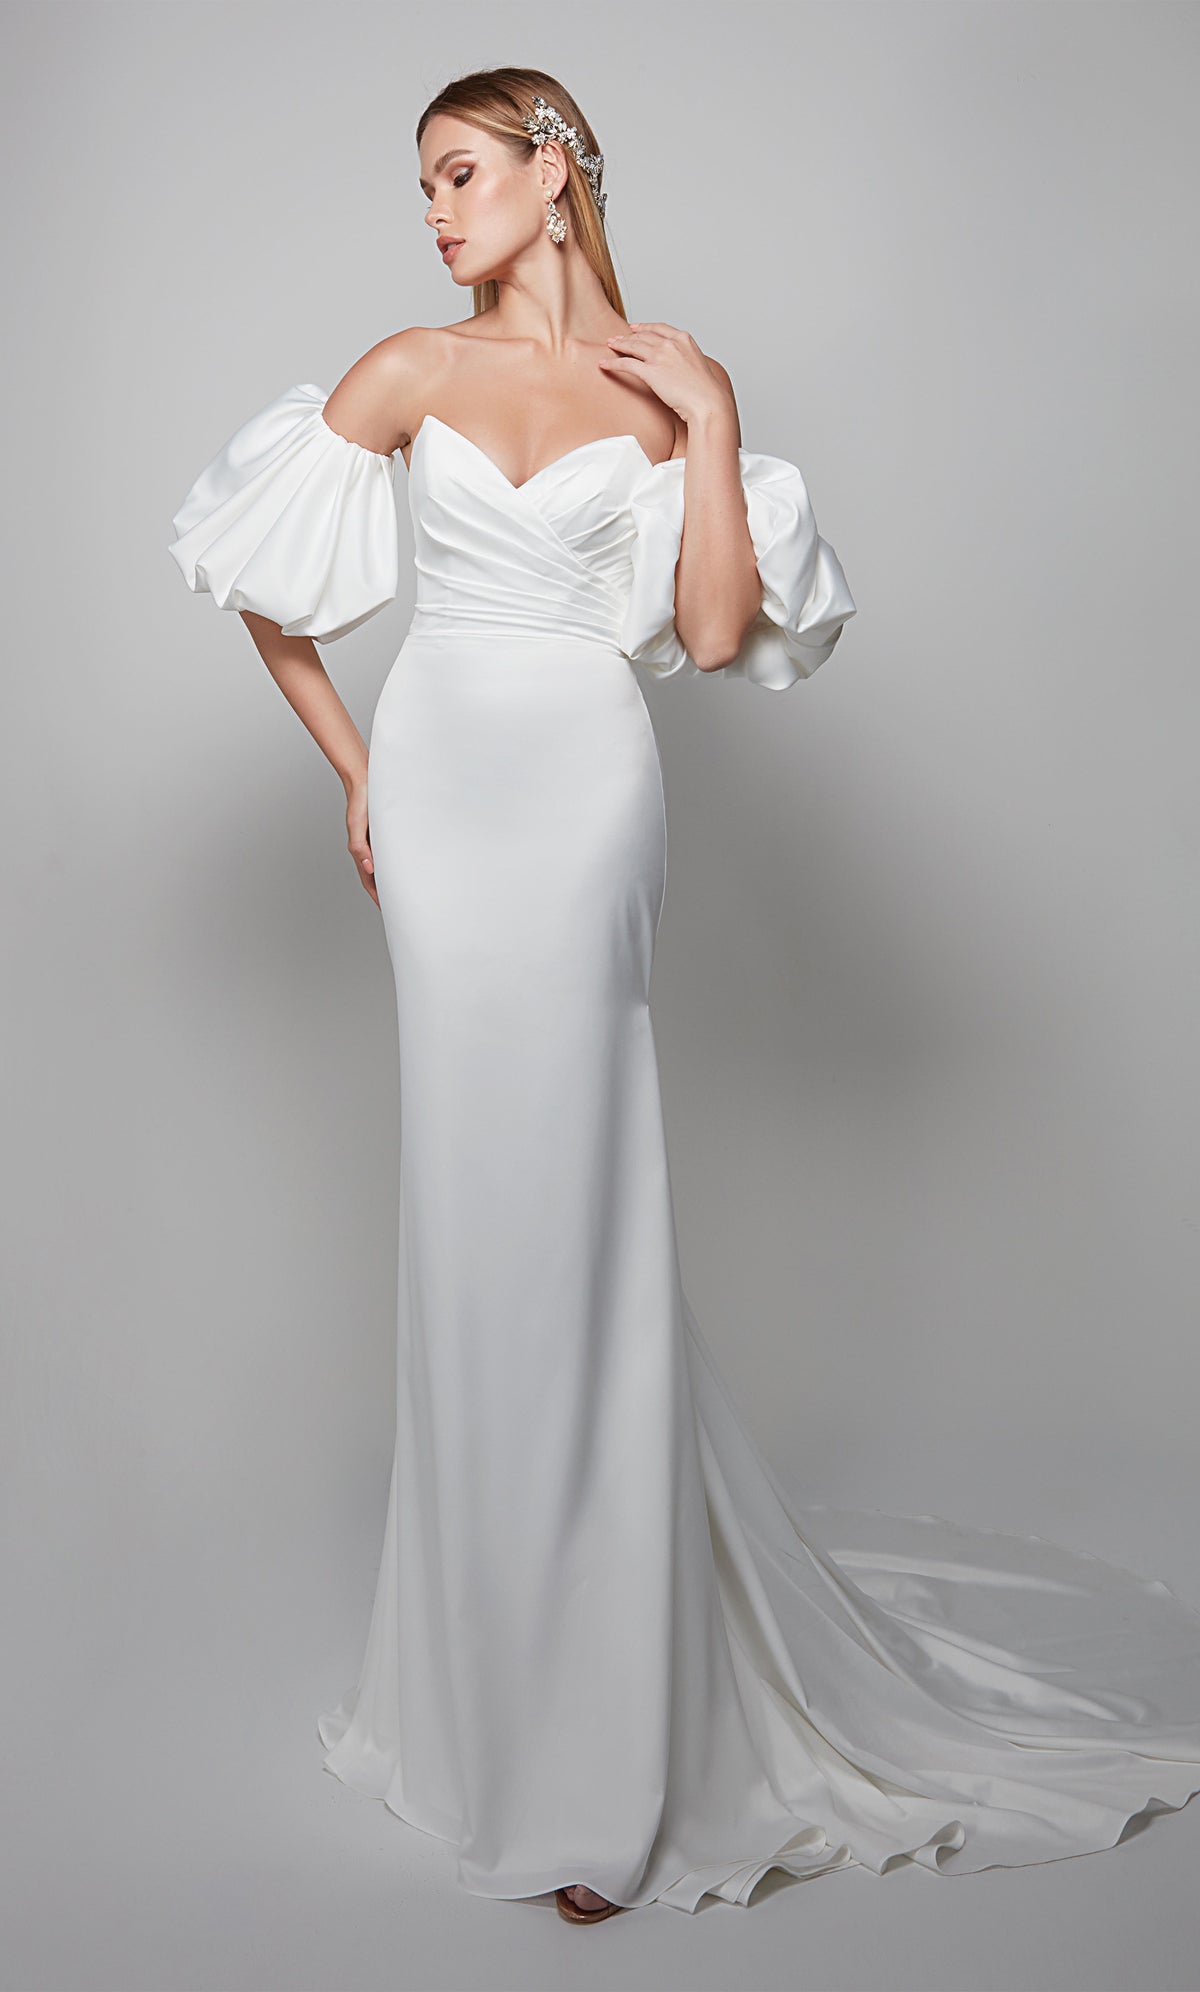 Simple strapless wedding dress with pleated bodice, detachable puff sleeves, and train in white satin.